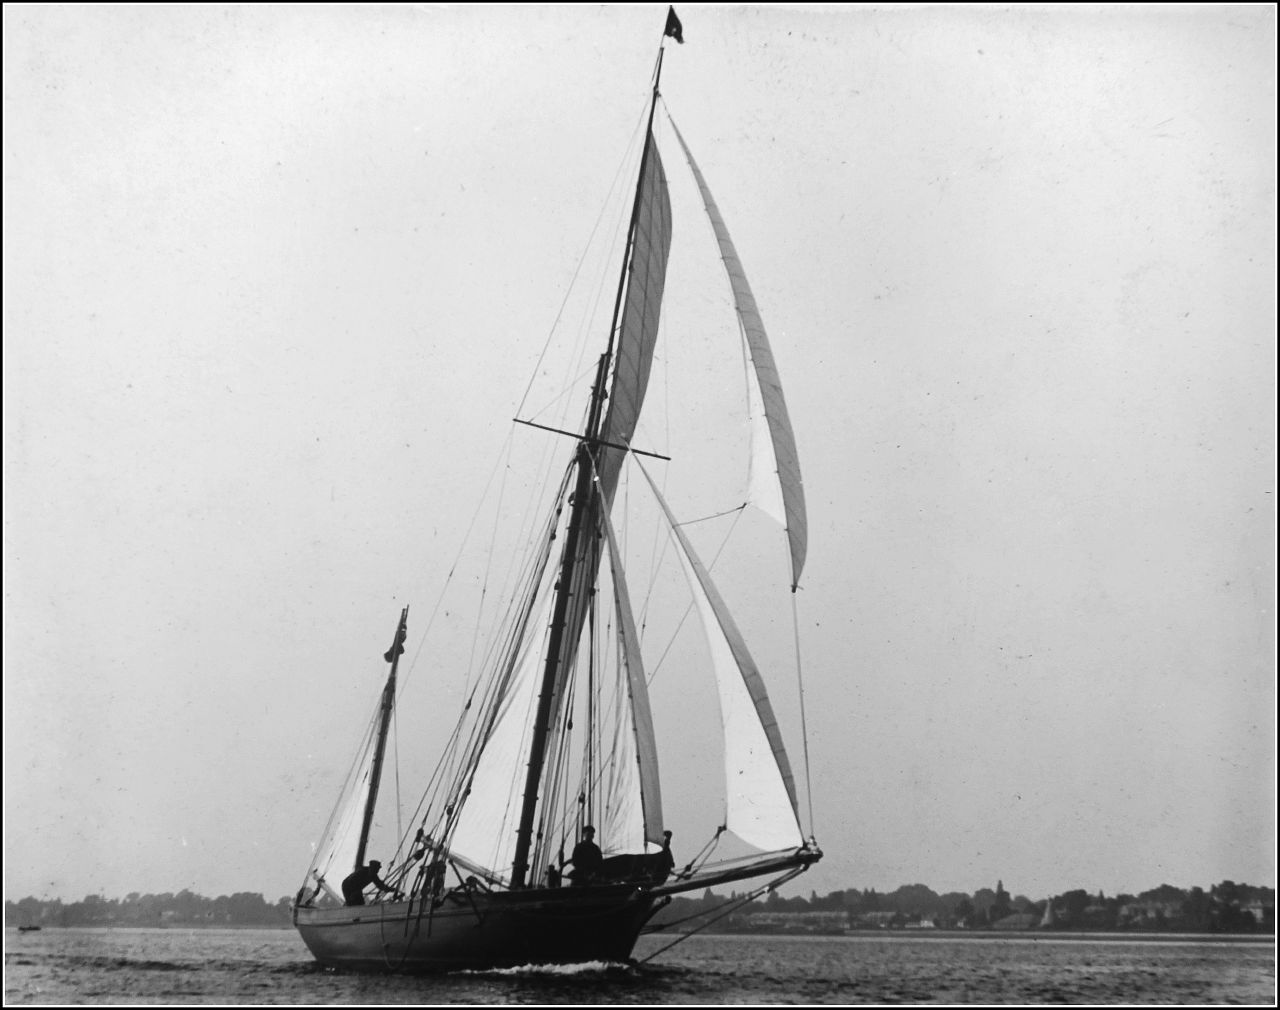 an old fashioned sailing vessel is on the water